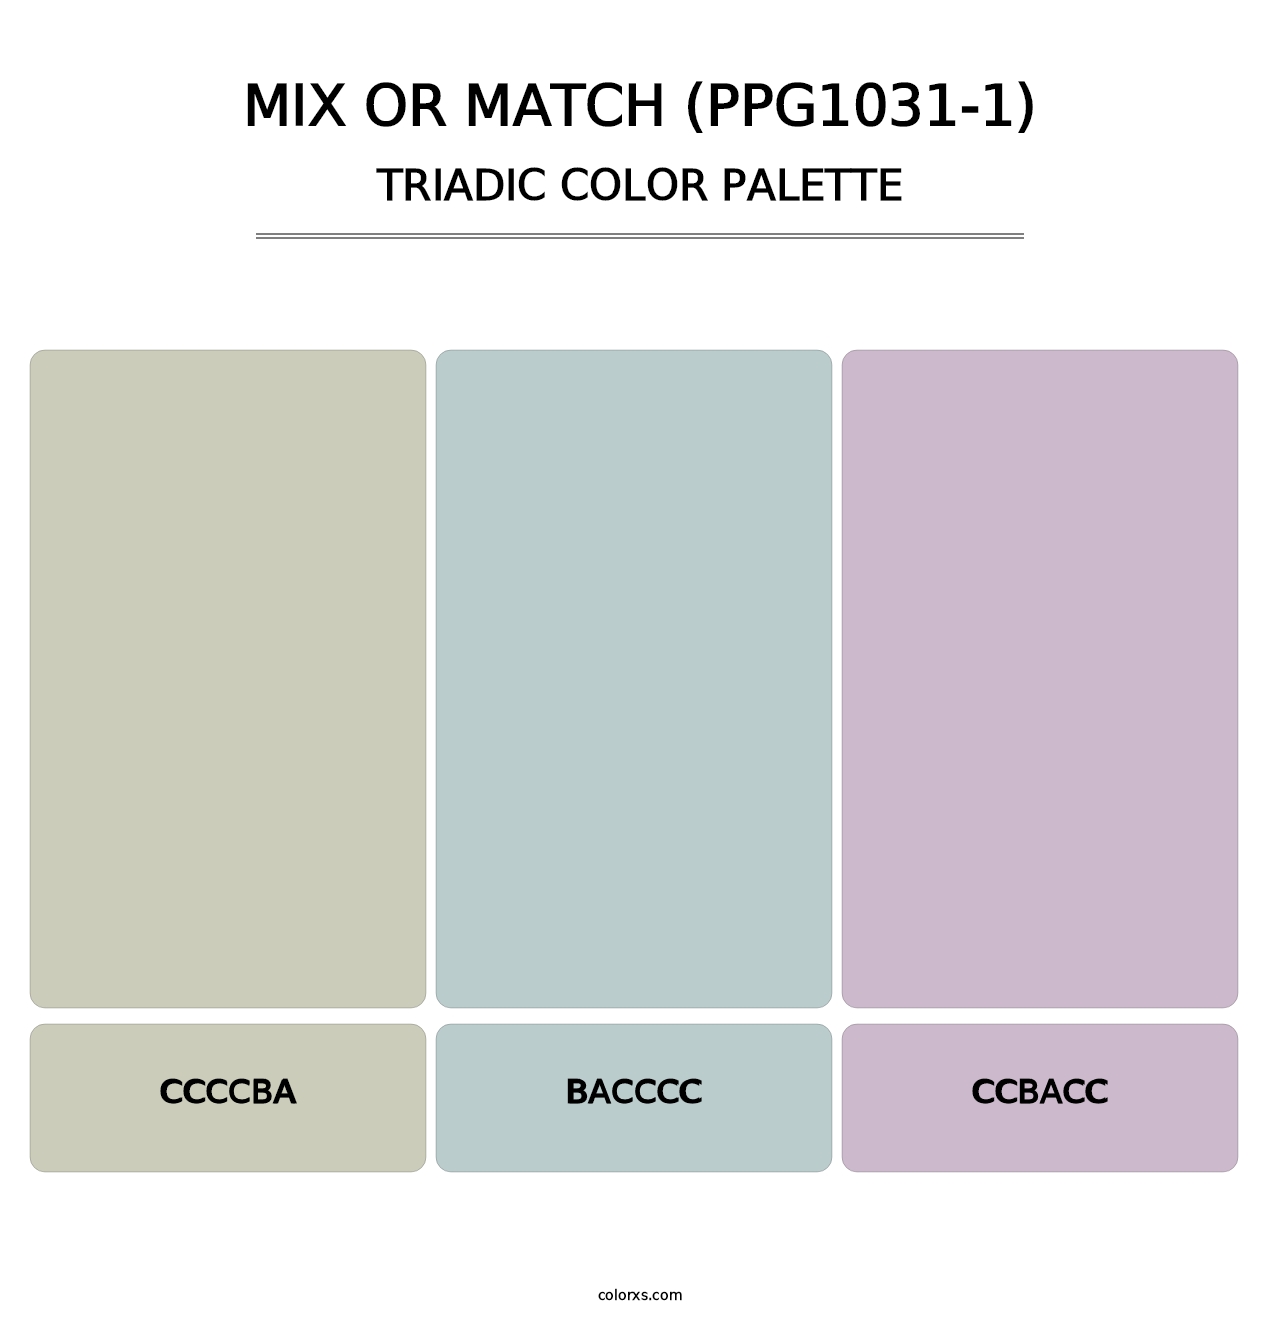 Mix Or Match (PPG1031-1) - Triadic Color Palette